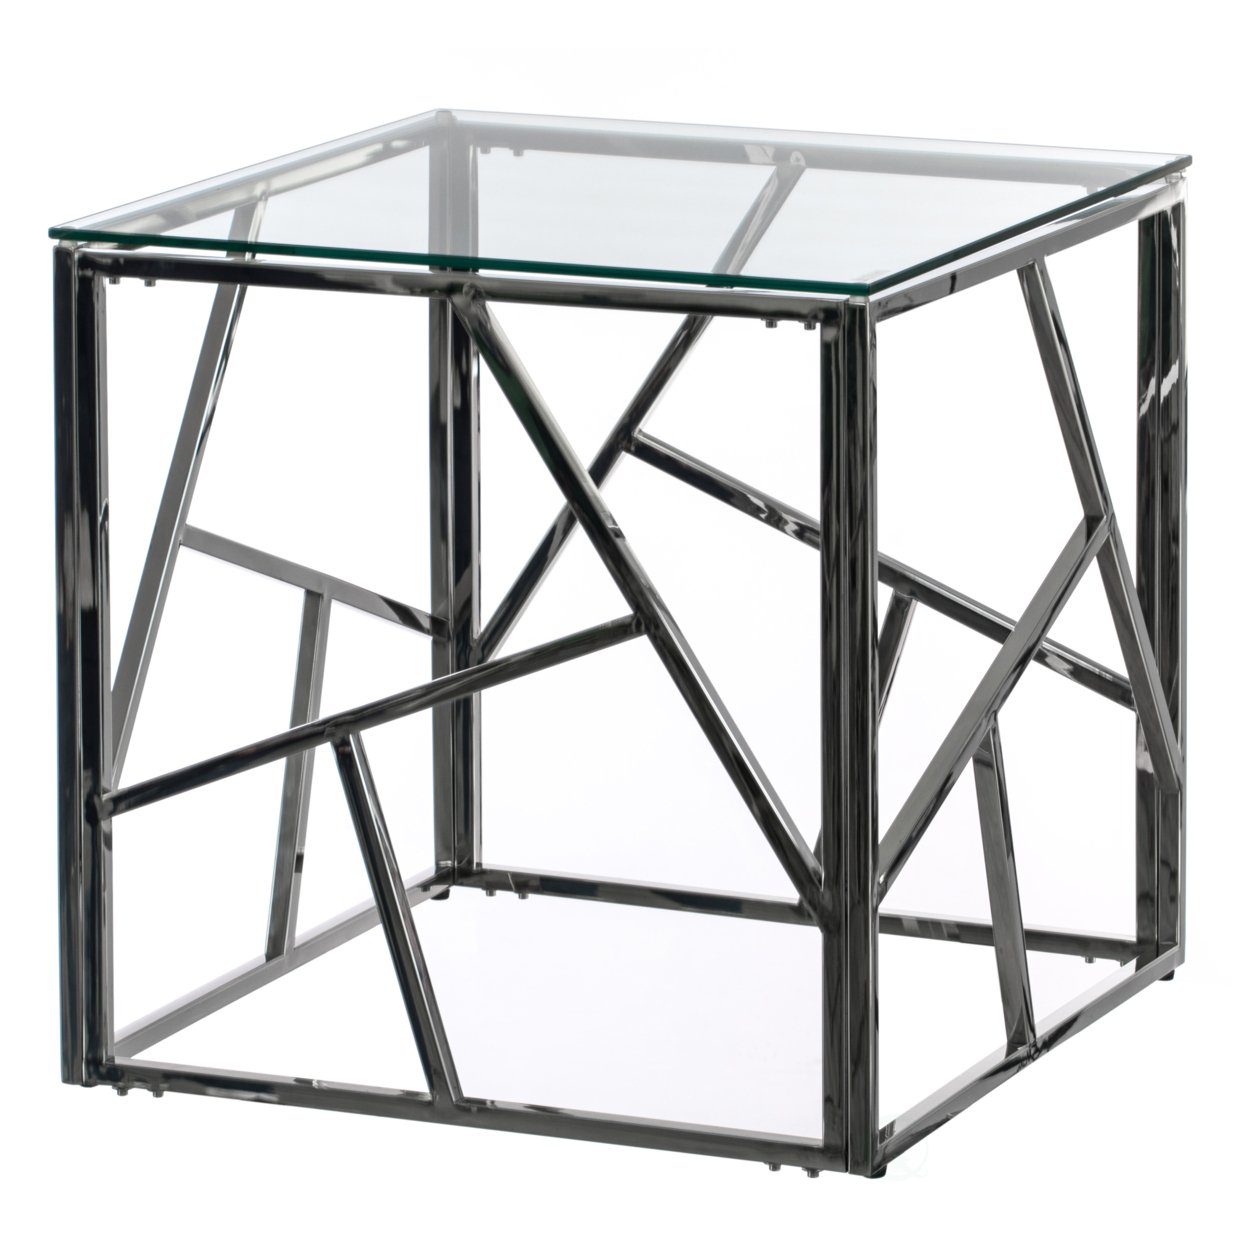 Modern Square End Side Table, Tempered Glass Top Metal Coffee Table - Silver